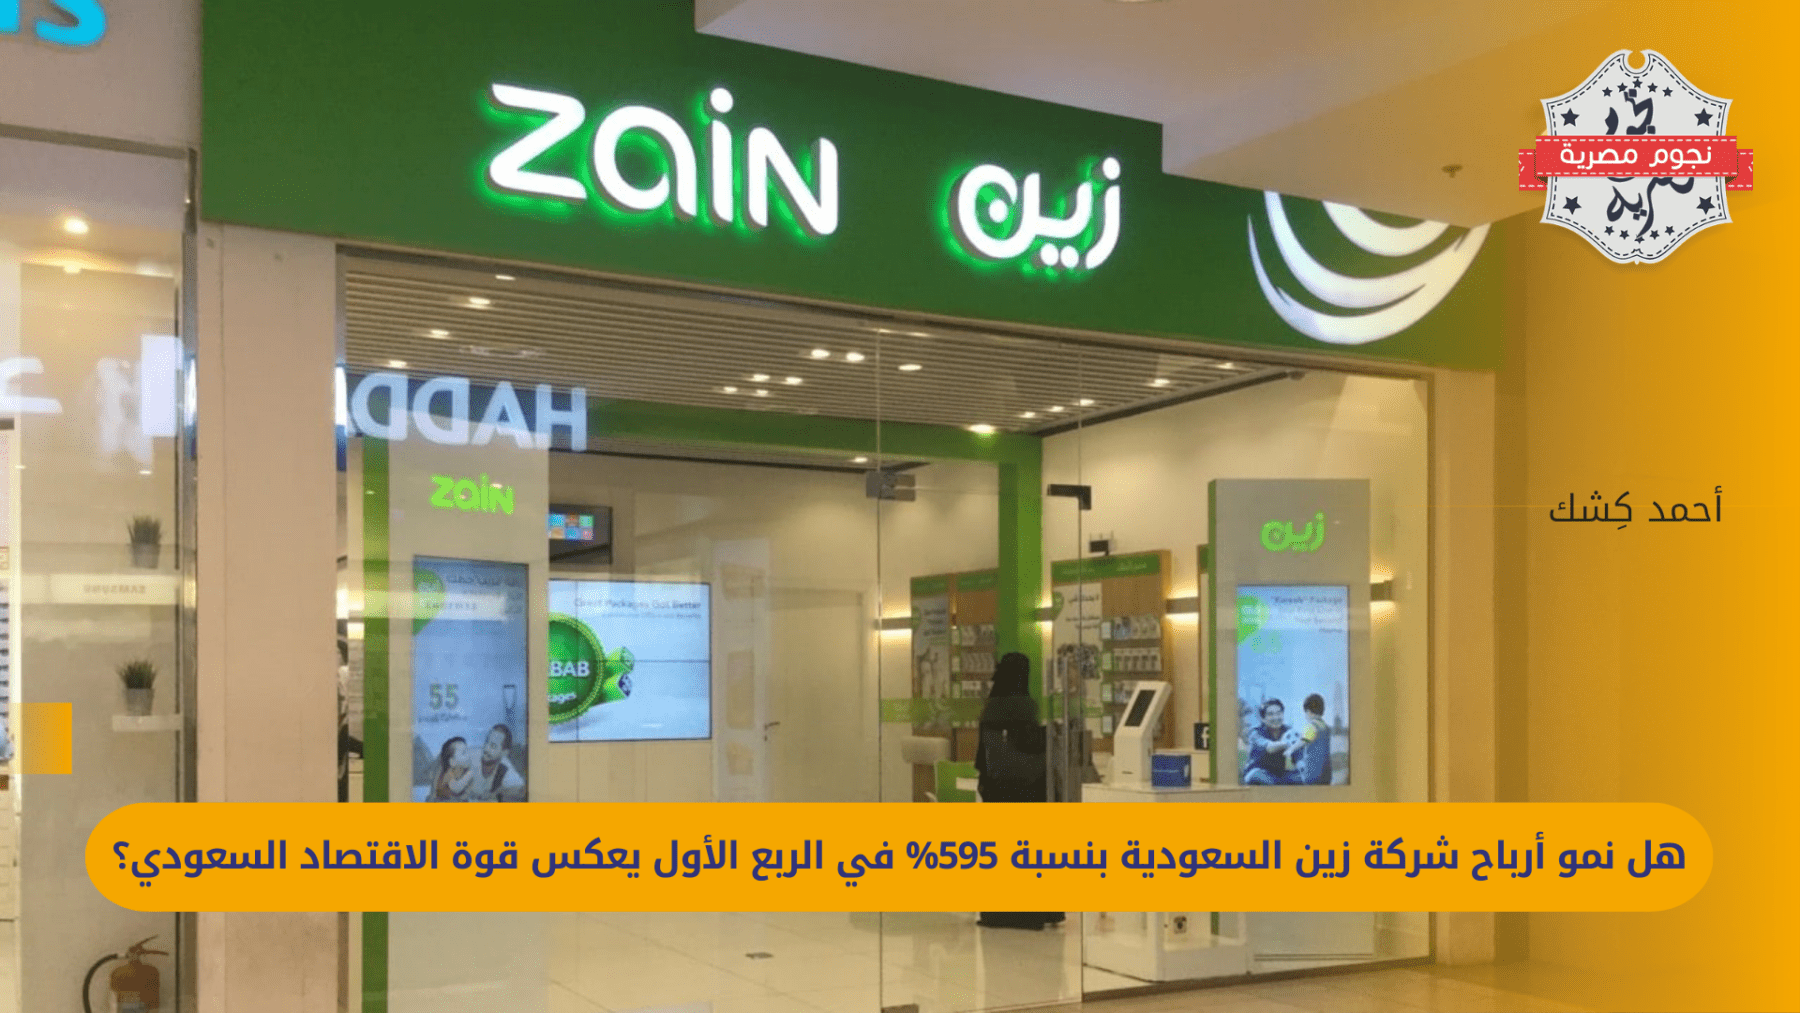 zain-saudi-arabia-records-sevenfold-increase-in-net-profit-due-to-5g-and-financial-technology-services